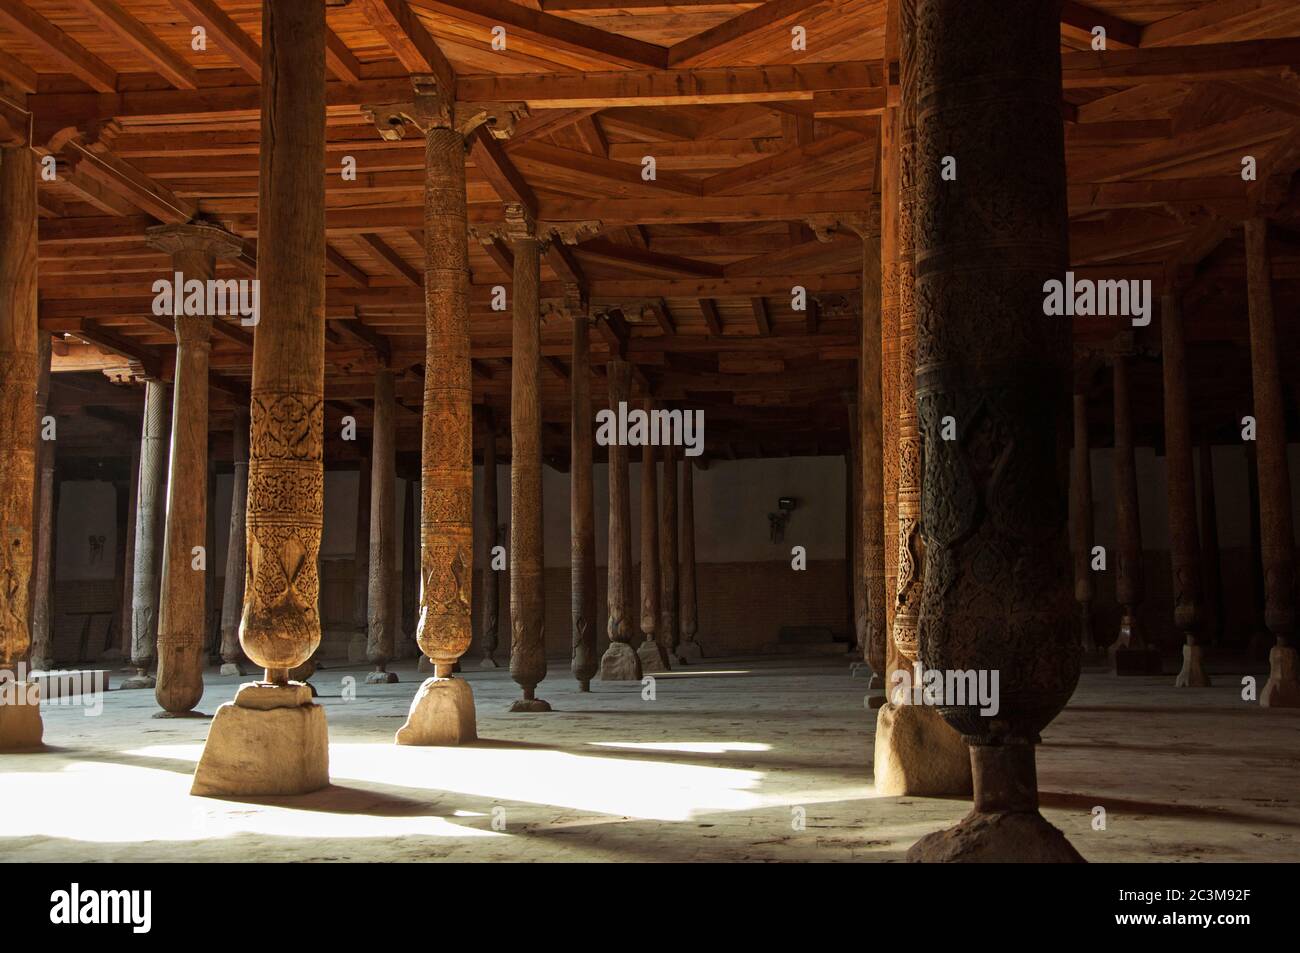 Wooden Columns High Resolution Stock Photography and Images - Alamy